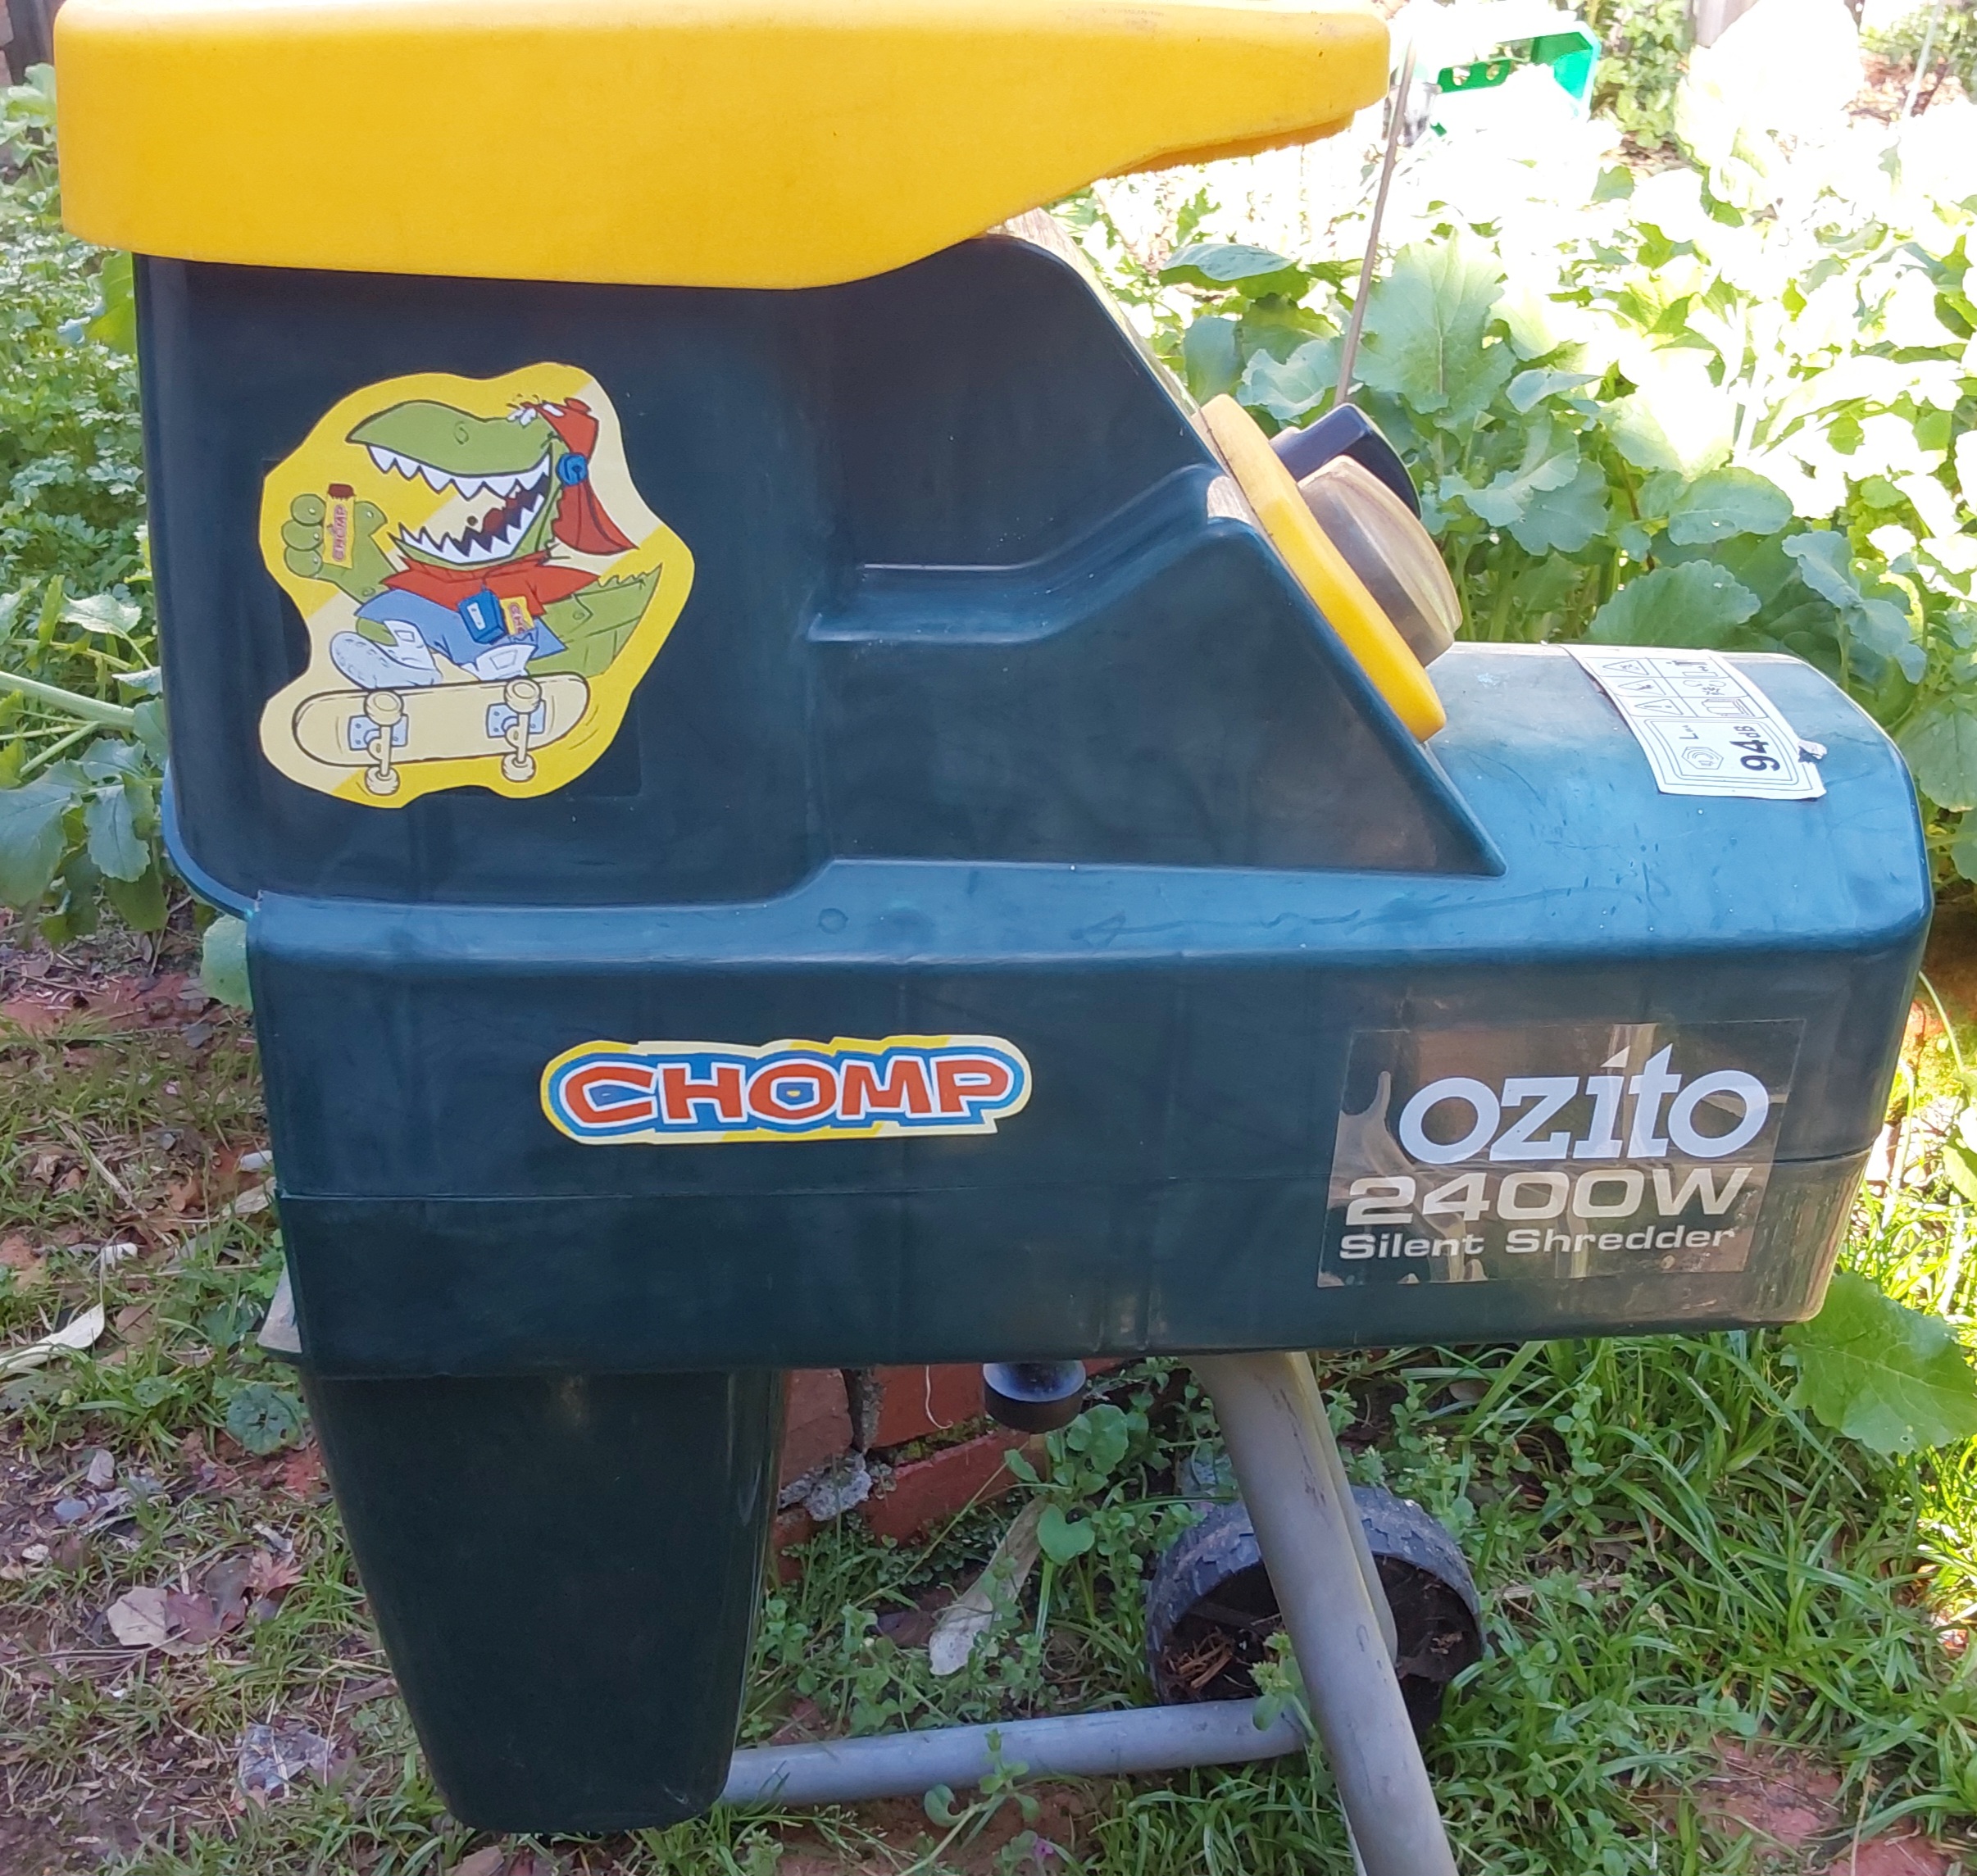 image of mulcher with stickers saying "Chomp" and with the image from Chomp chocolate bars